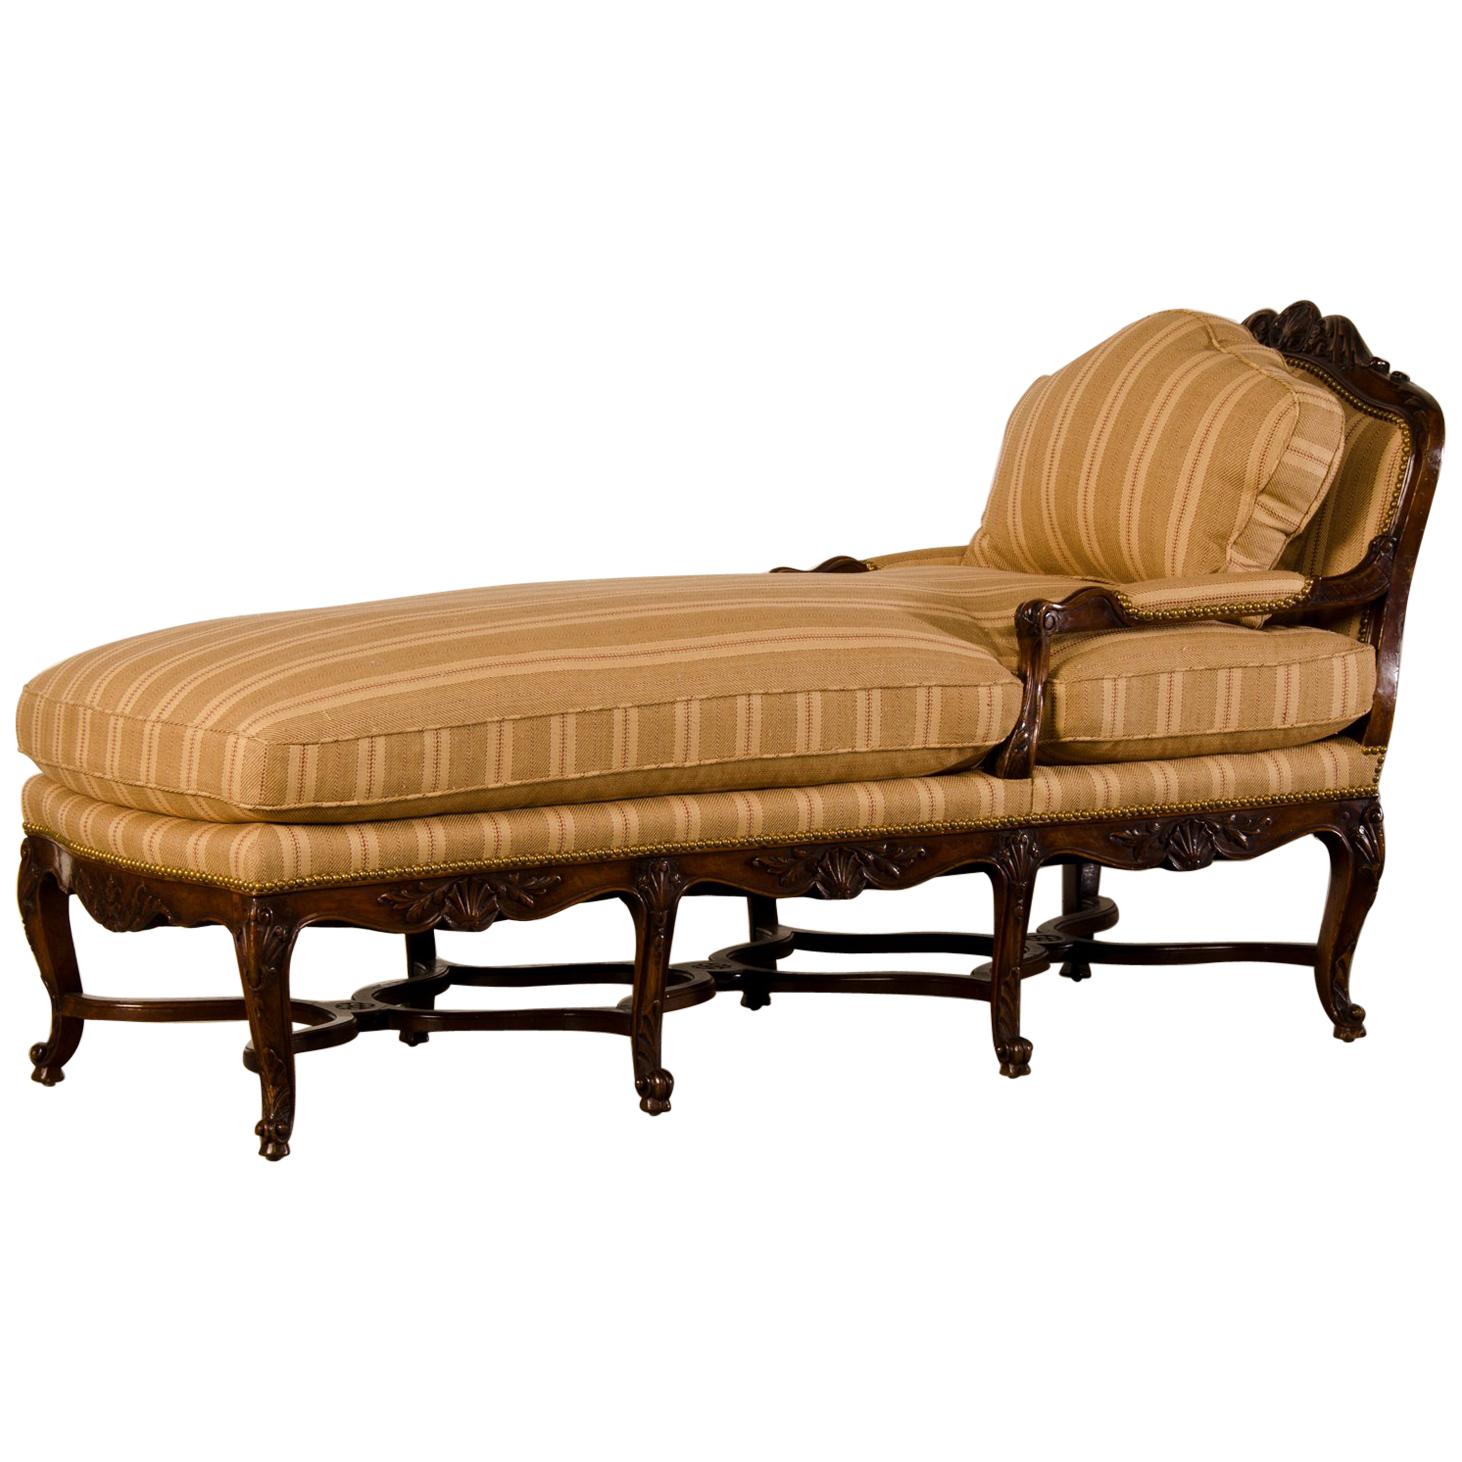 Antique French Régence Period Carved Walnut Chaise Lounge, circa 1720 For Sale